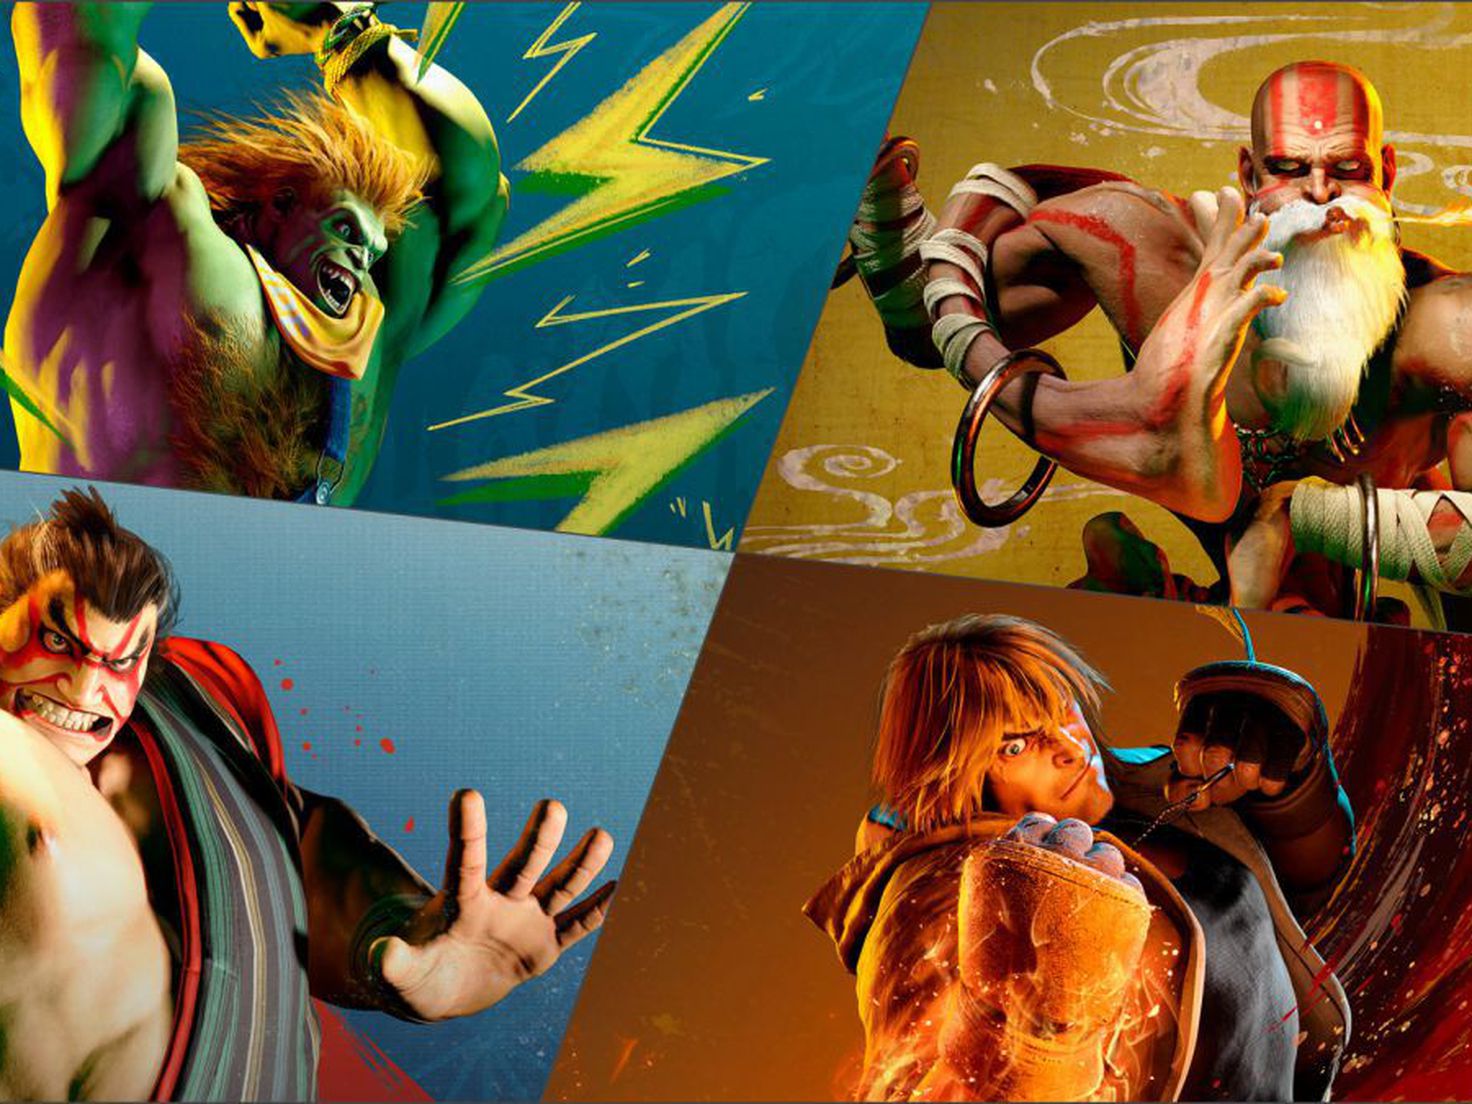 Street Fighter 6, Official Blanka Overview Trailer